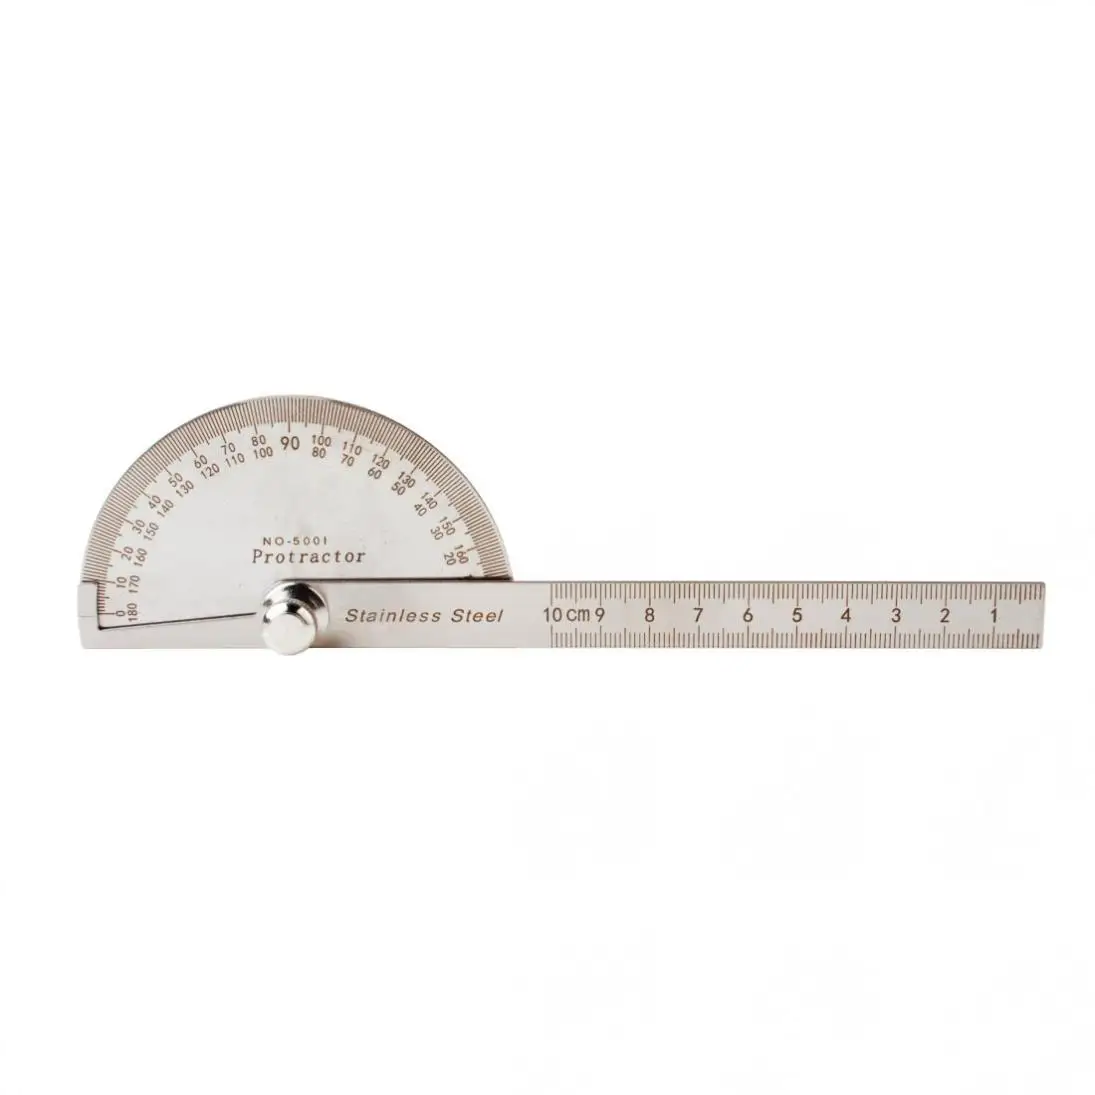 

Angel Ruler Stainless Steel Protractor Round Angle Finder Craft Ruler Measure Tool 100mm